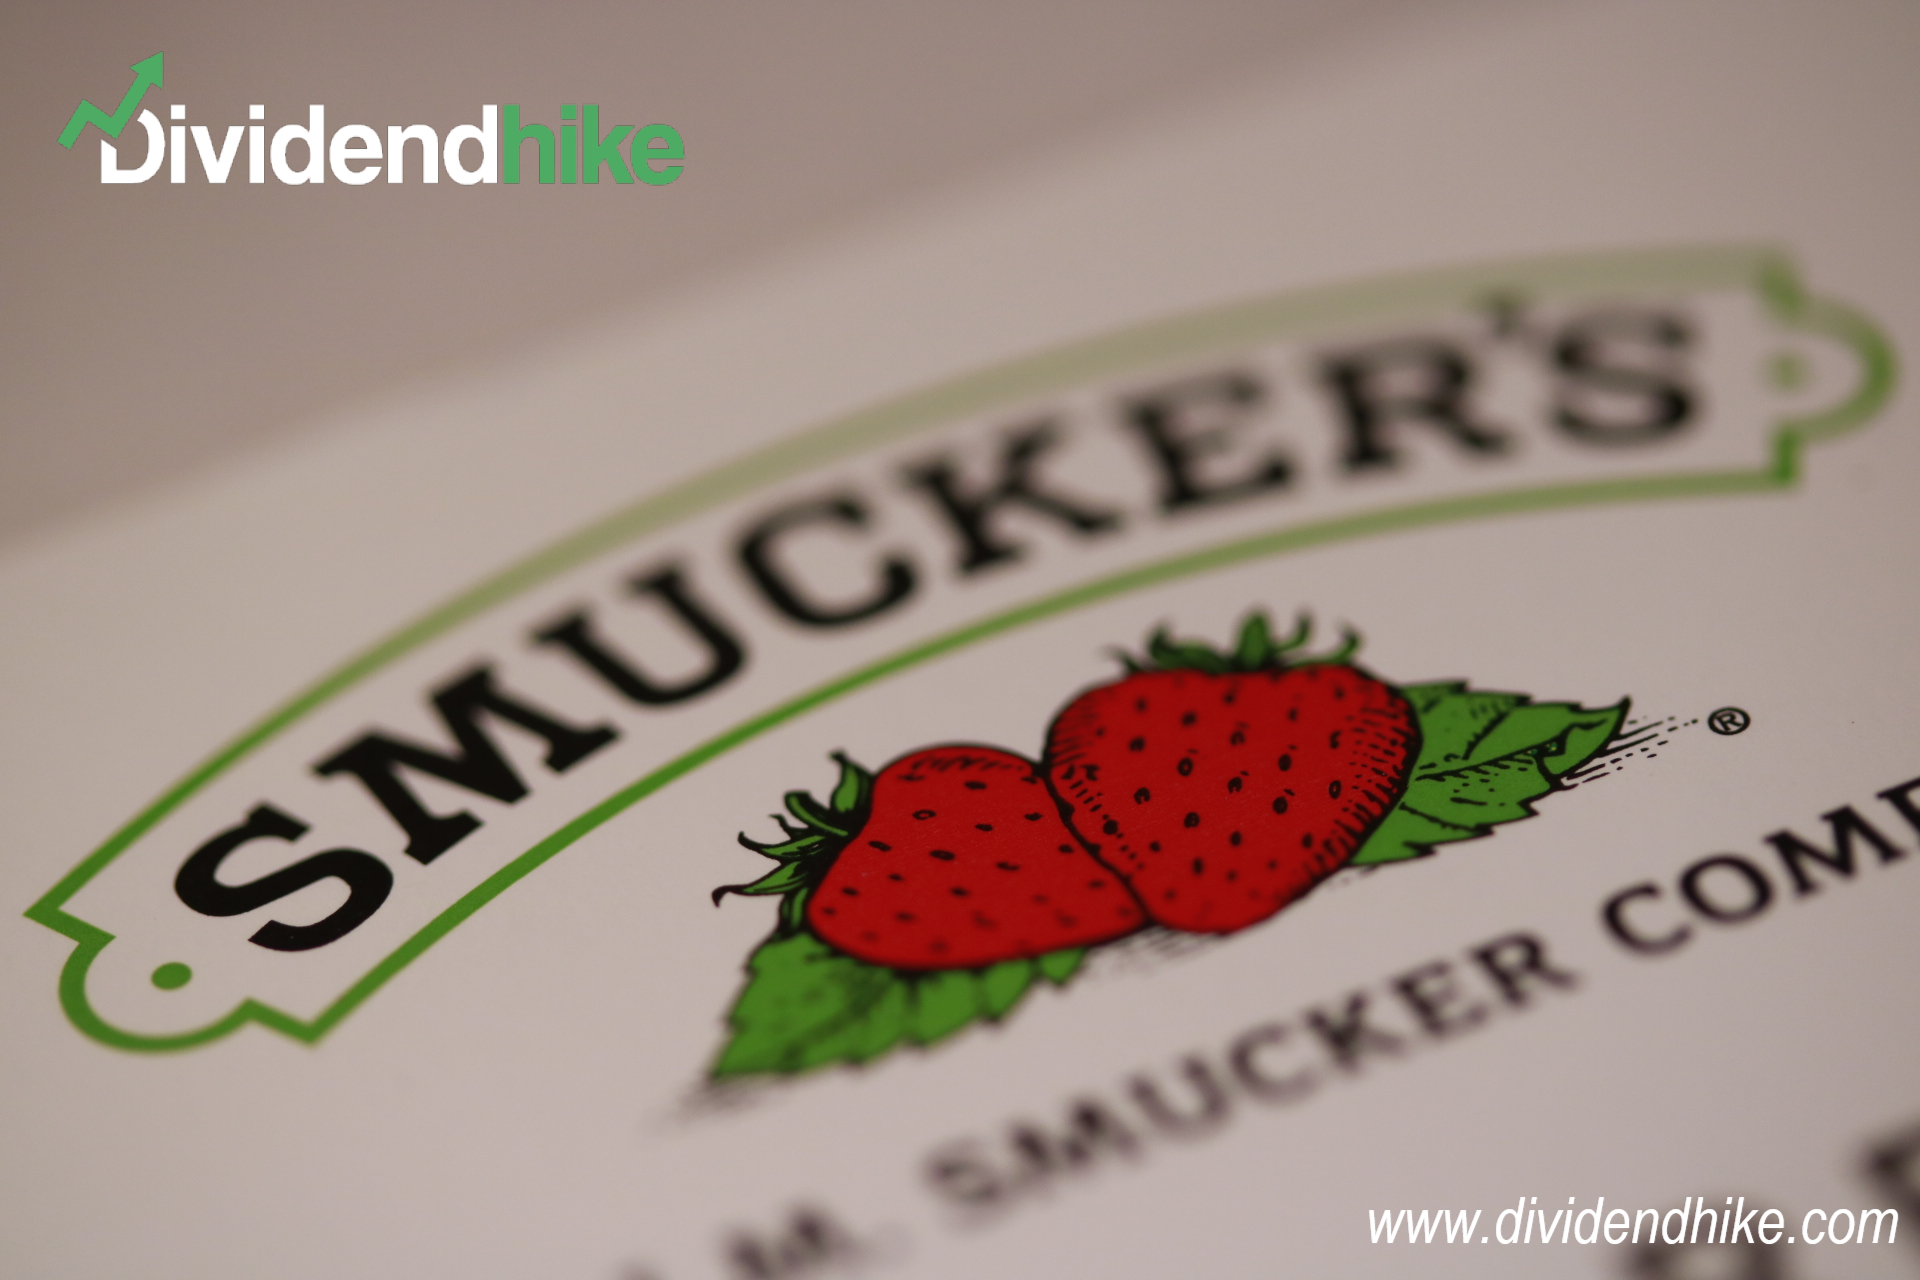 J.M. Smucker hikes dividend by 4%